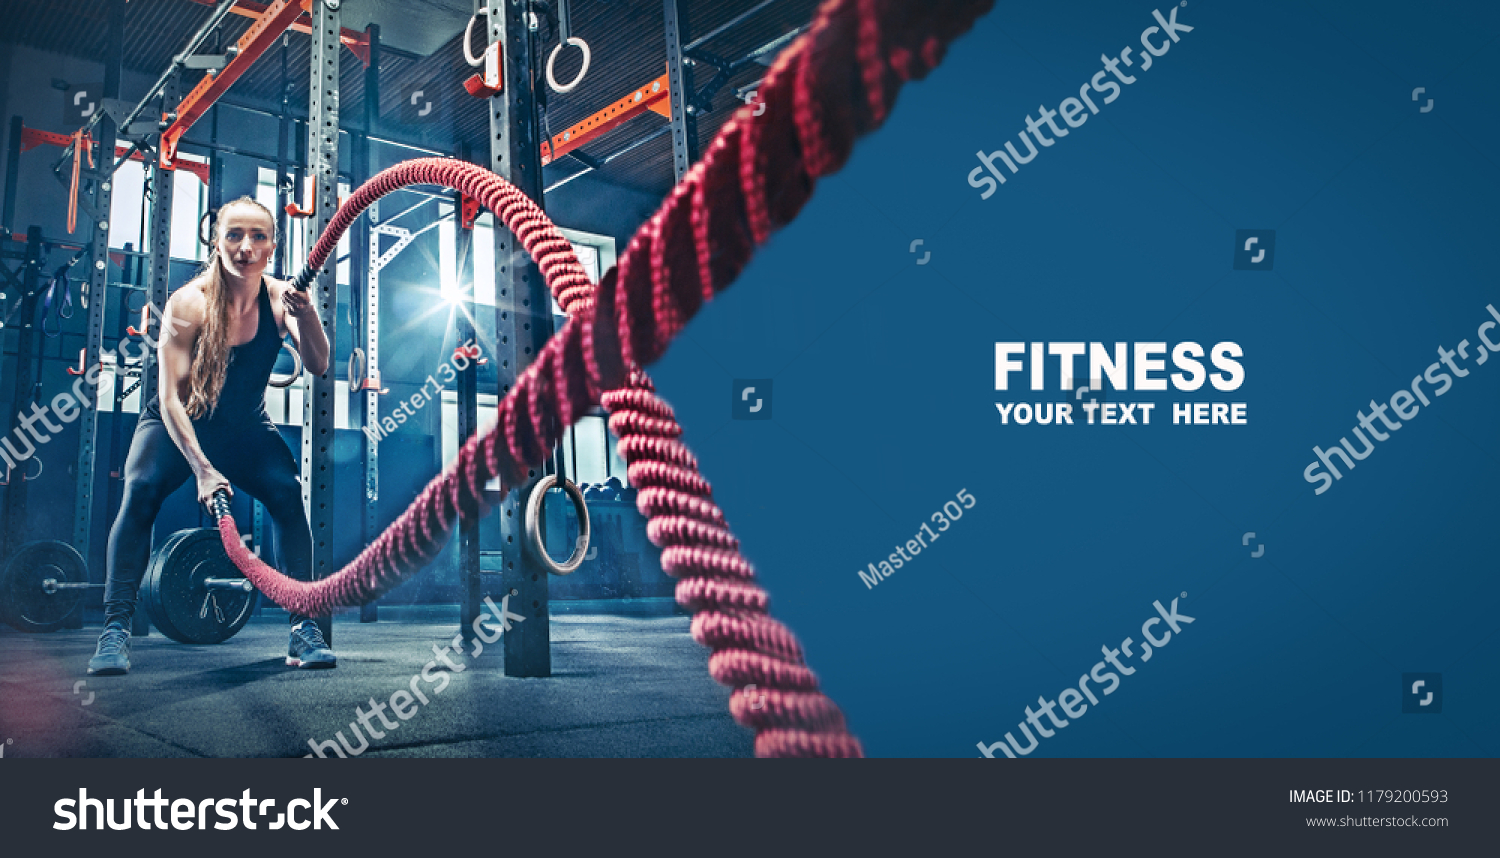 Woman with battle rope battle ropes exercise in the fitness gym. gym, sport, rope, training, athlete, workout, exercises concept #1179200593